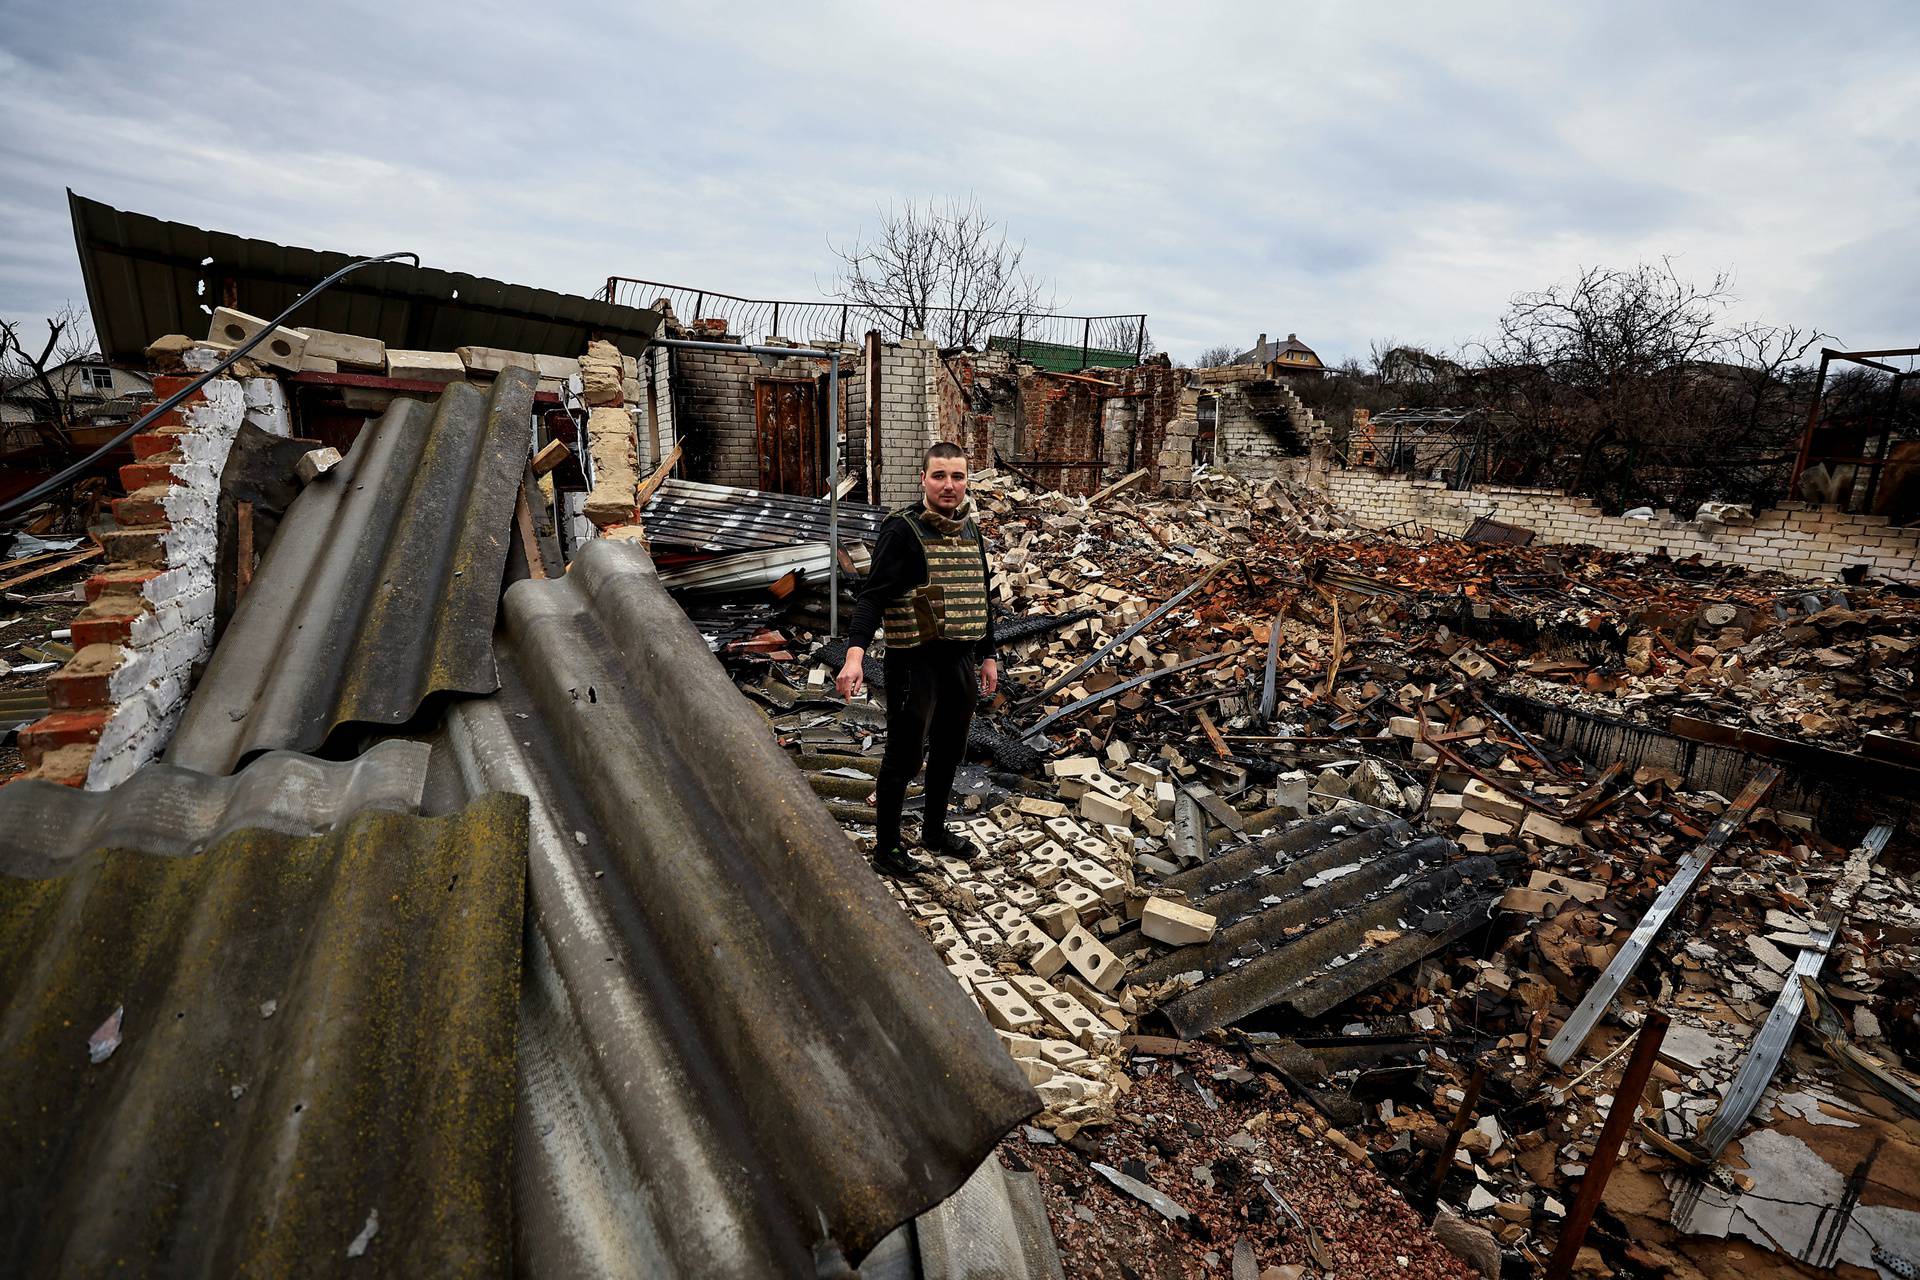 Markov Oleksandr, 32 and a sales man turned into a humanitarian aid volunteer, speaks to journalists as he stands on the rubbles of his parents' house, which was destroyed by shelling amid Russia's Invasion of Ukraine, in Chernihiv